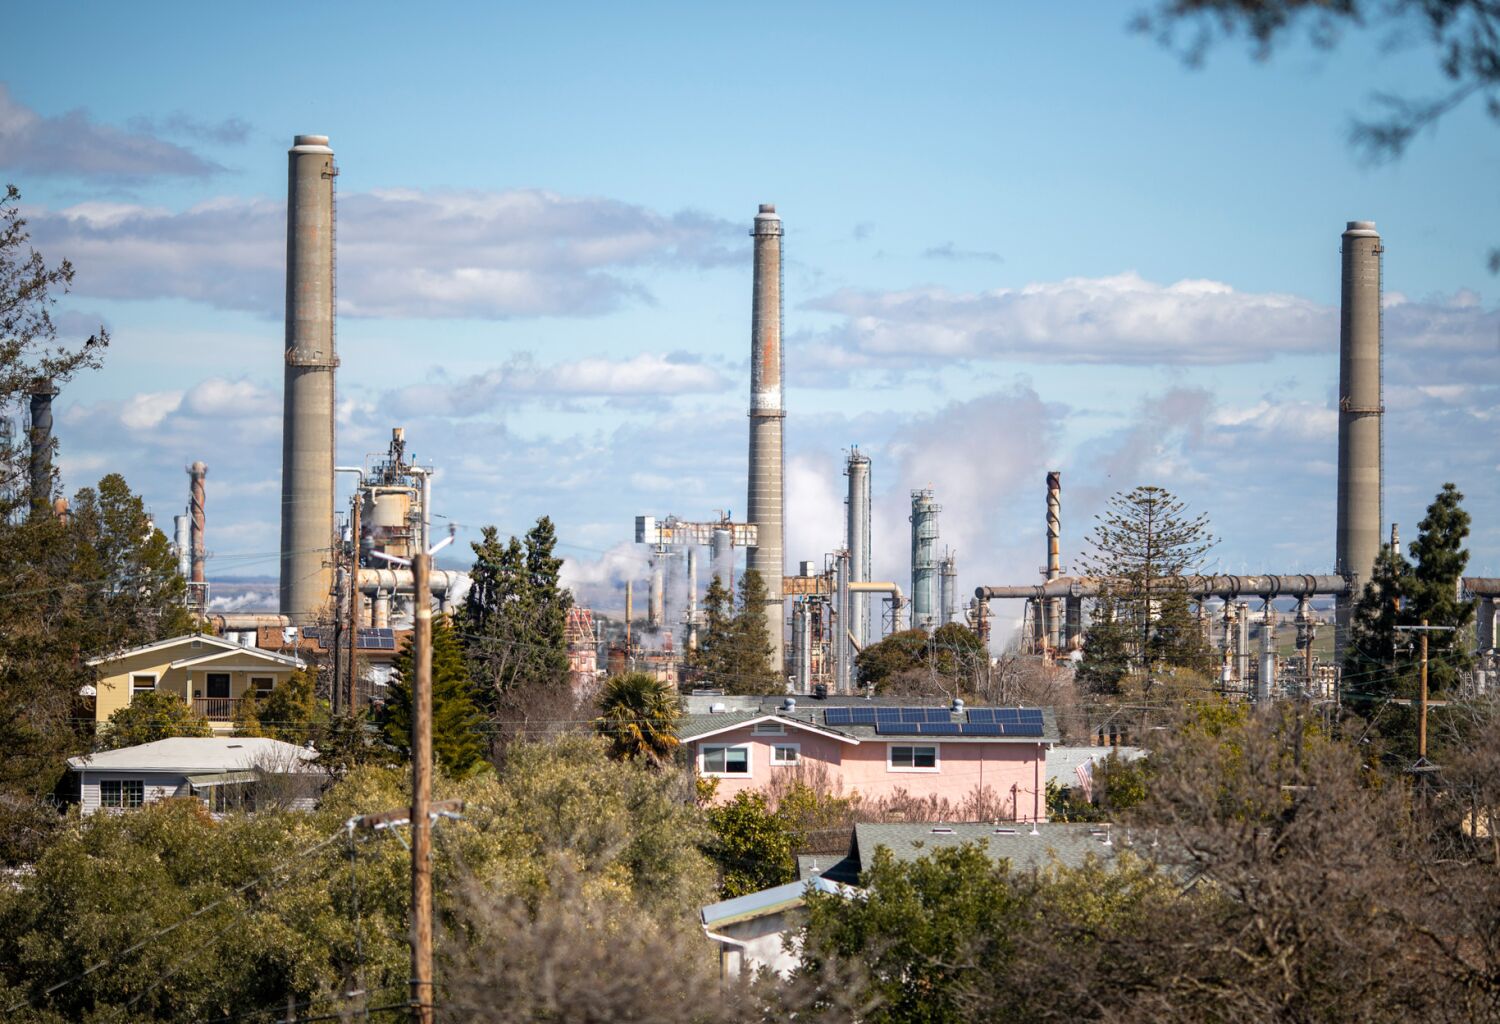 Bay Area refinery fallout does not pose significant health risk, authorities say